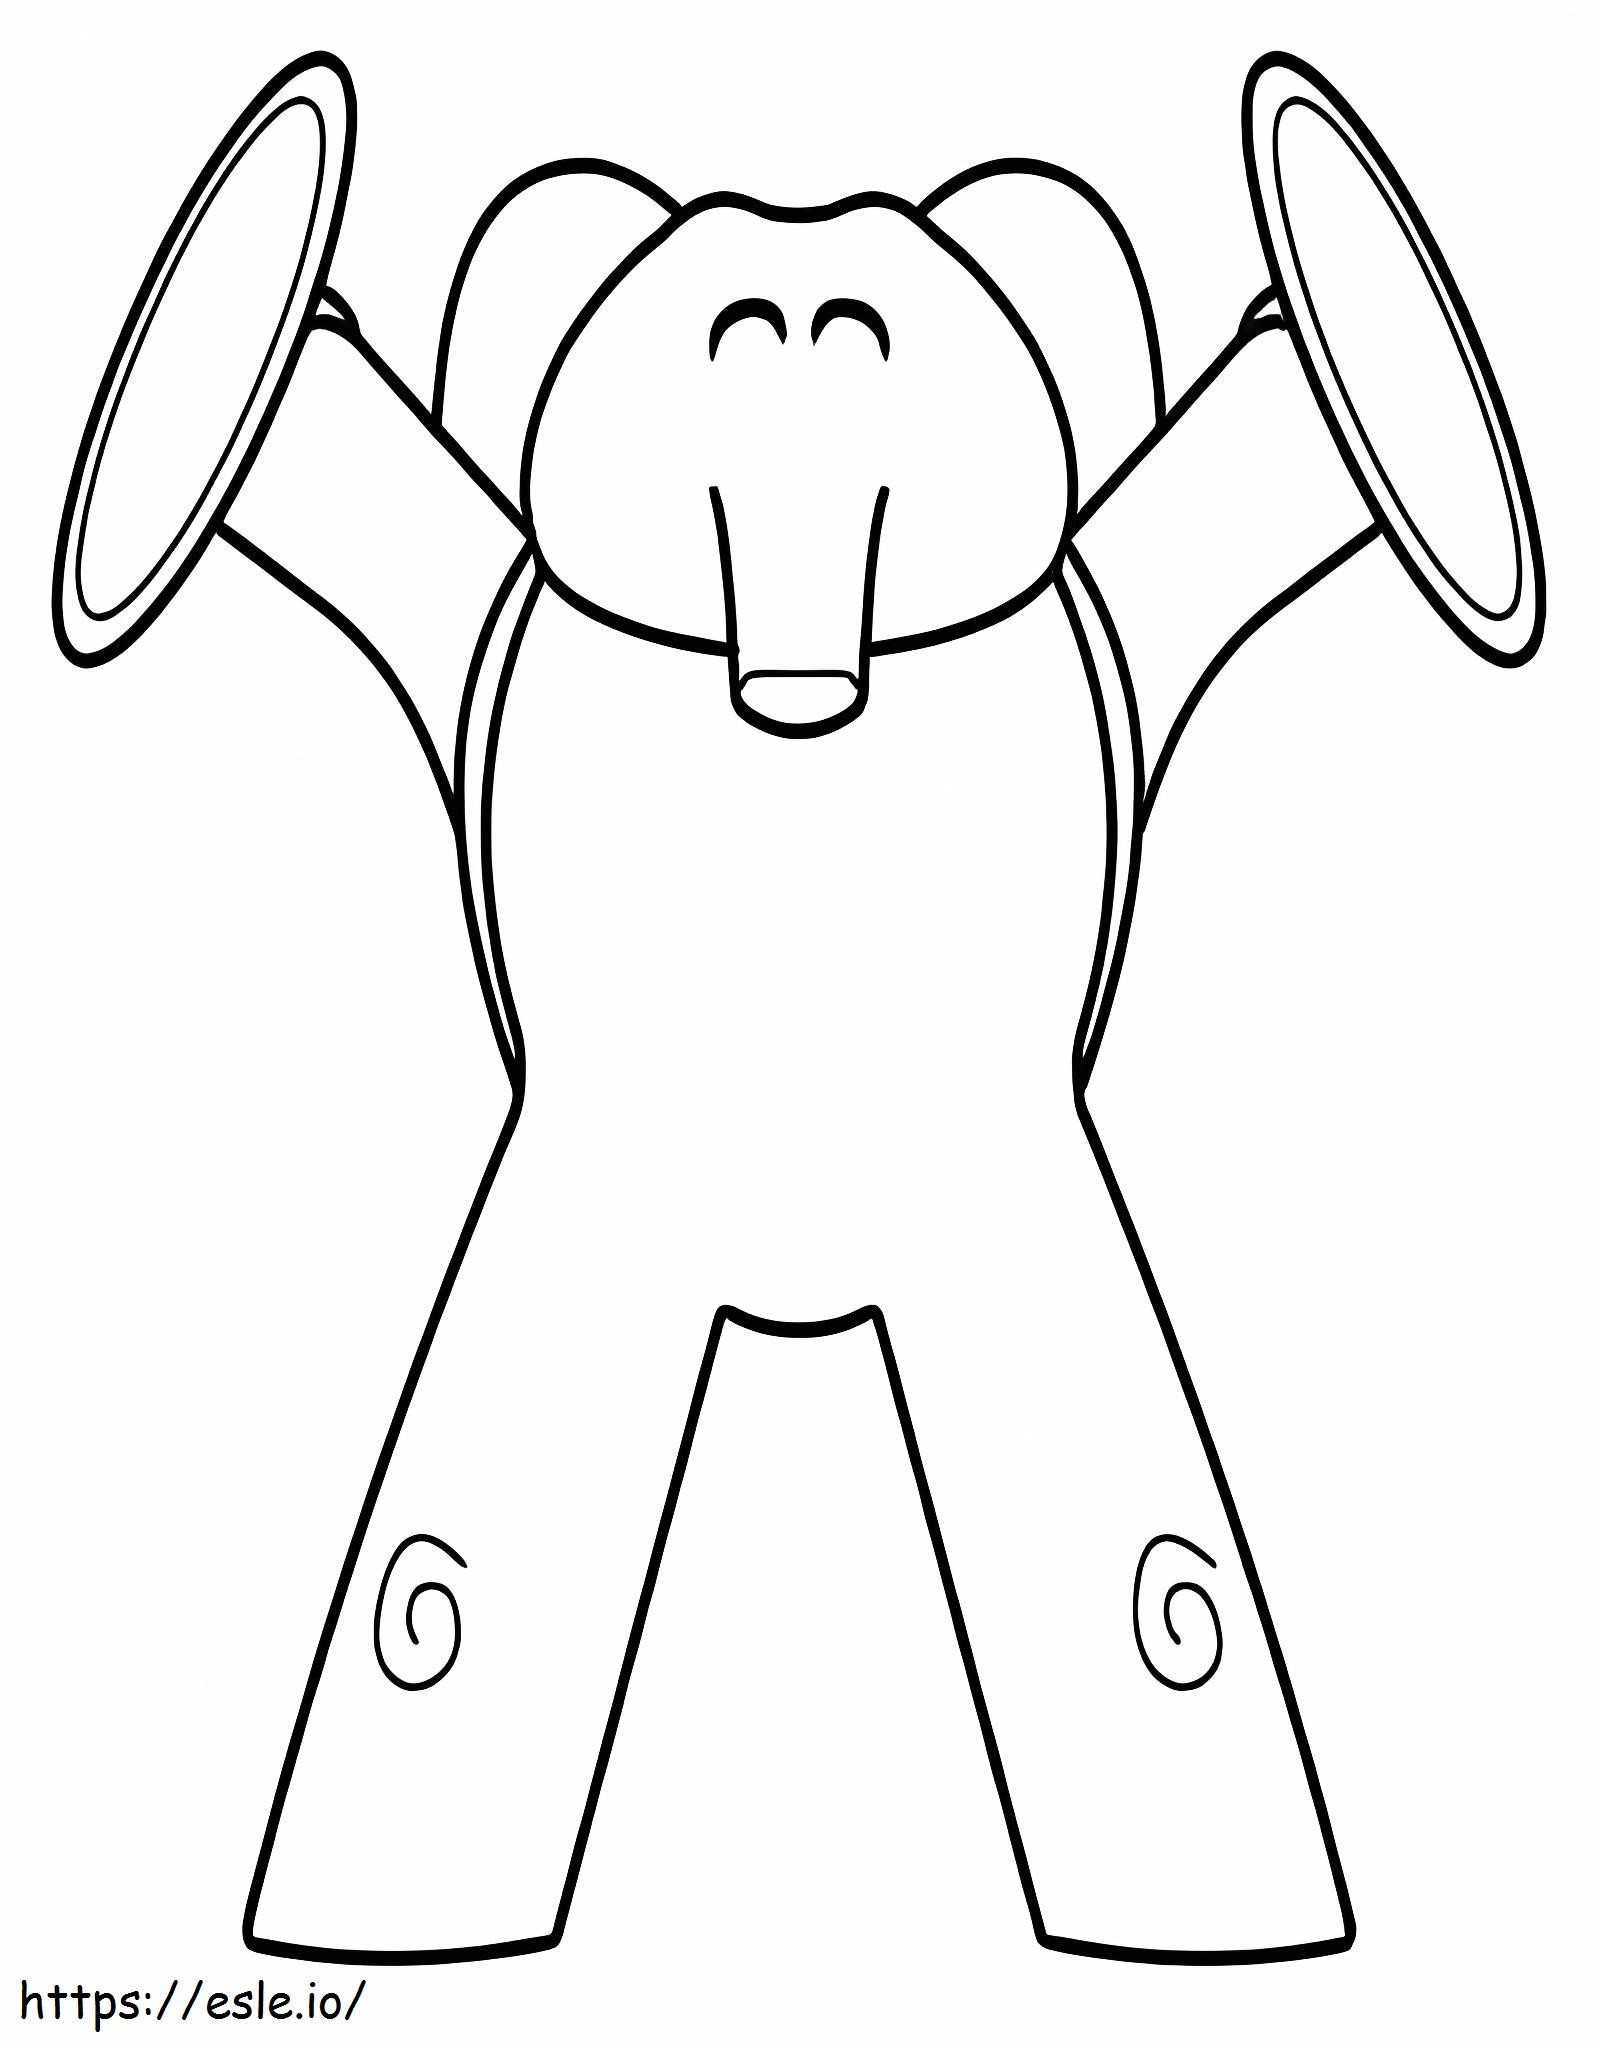 Elly Funny coloring page